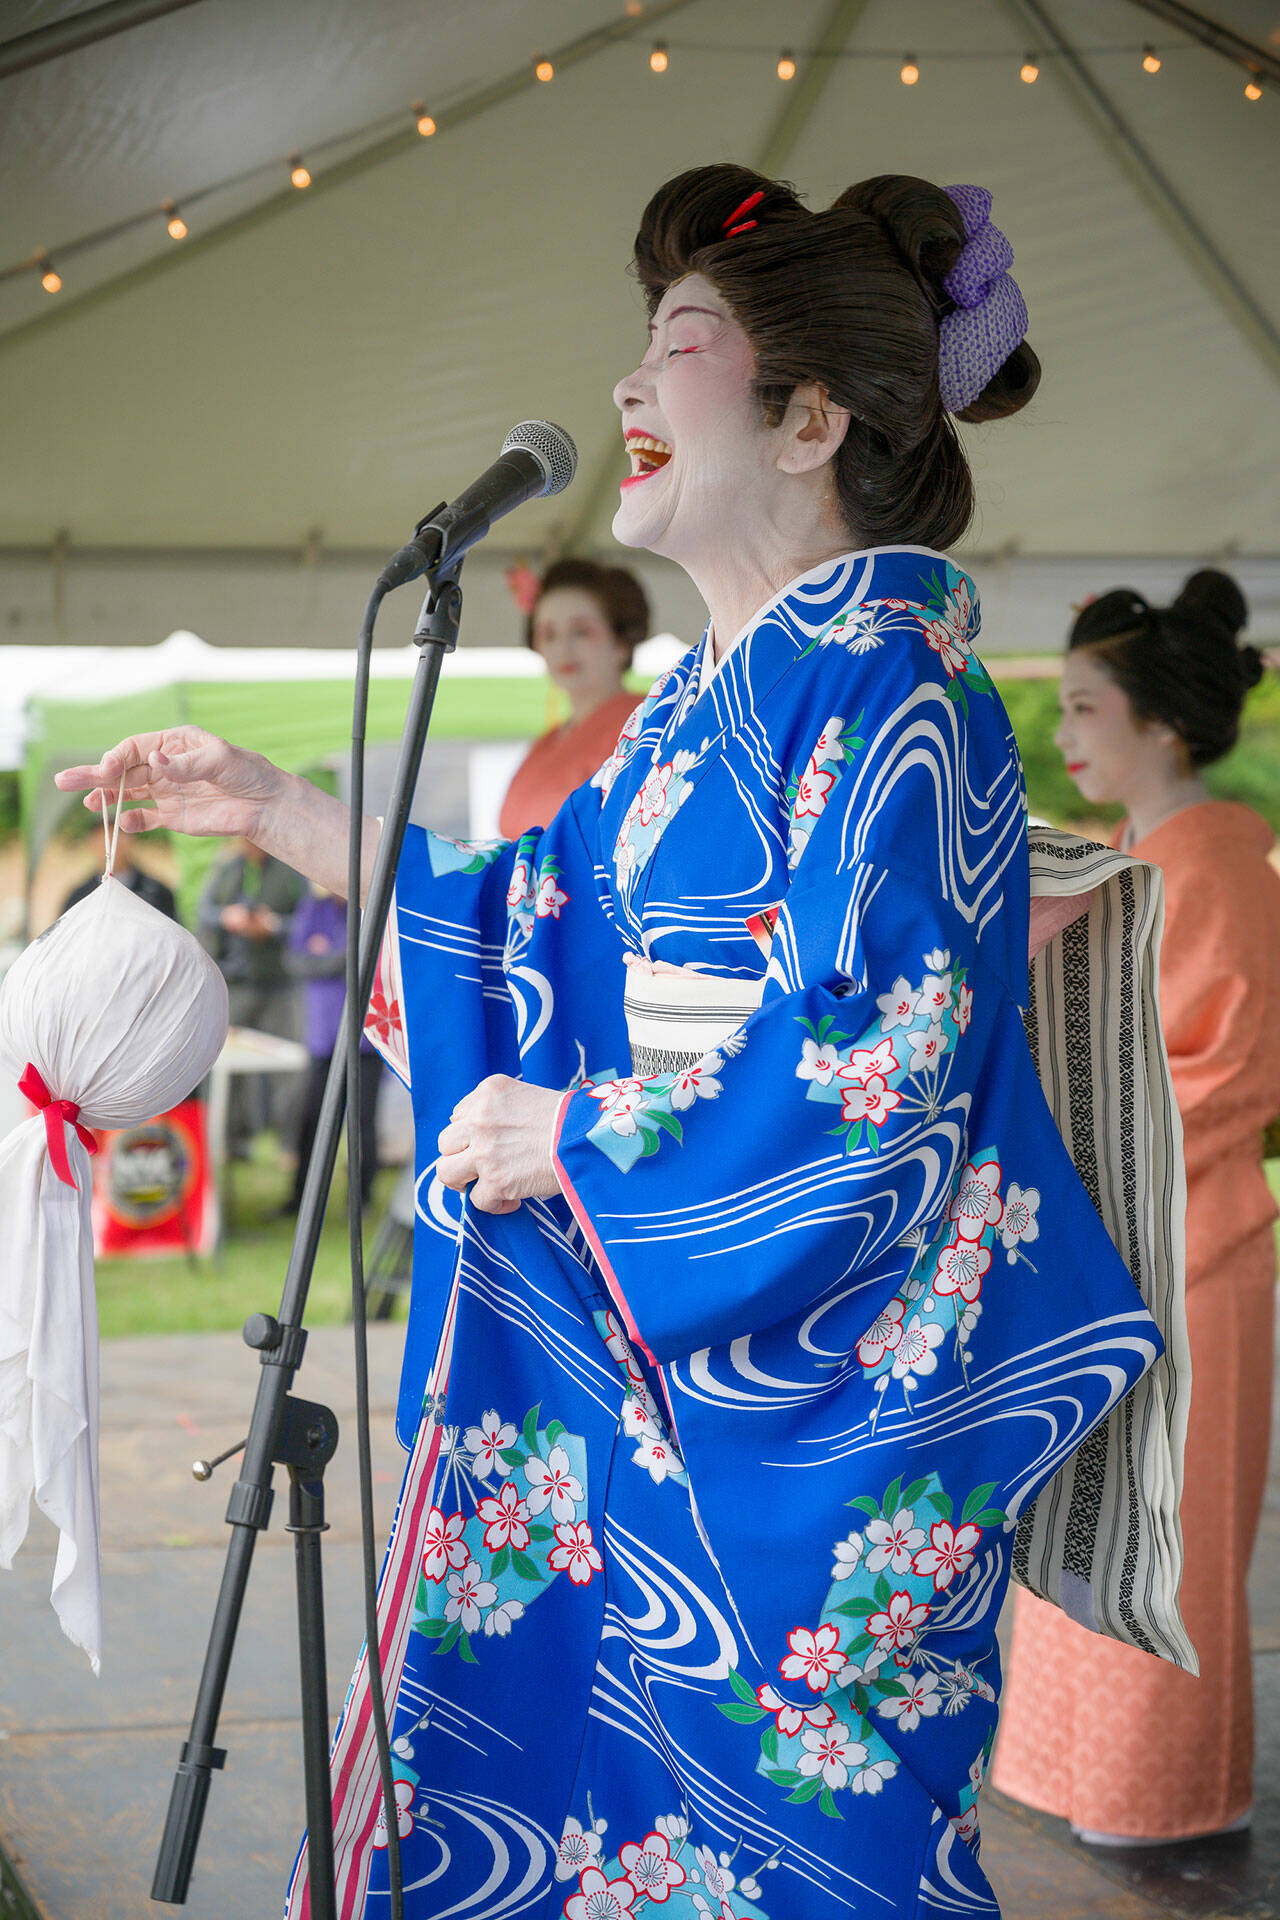 Courtesy Photo
Mukai Farm & Garden’s Japan Fest will feature performances, dancing, a Children’s Village, food, a “nominoichi” market of Asian collectibles, presentations by vendors and nonprofit organizations, Taiko drumming, and more.